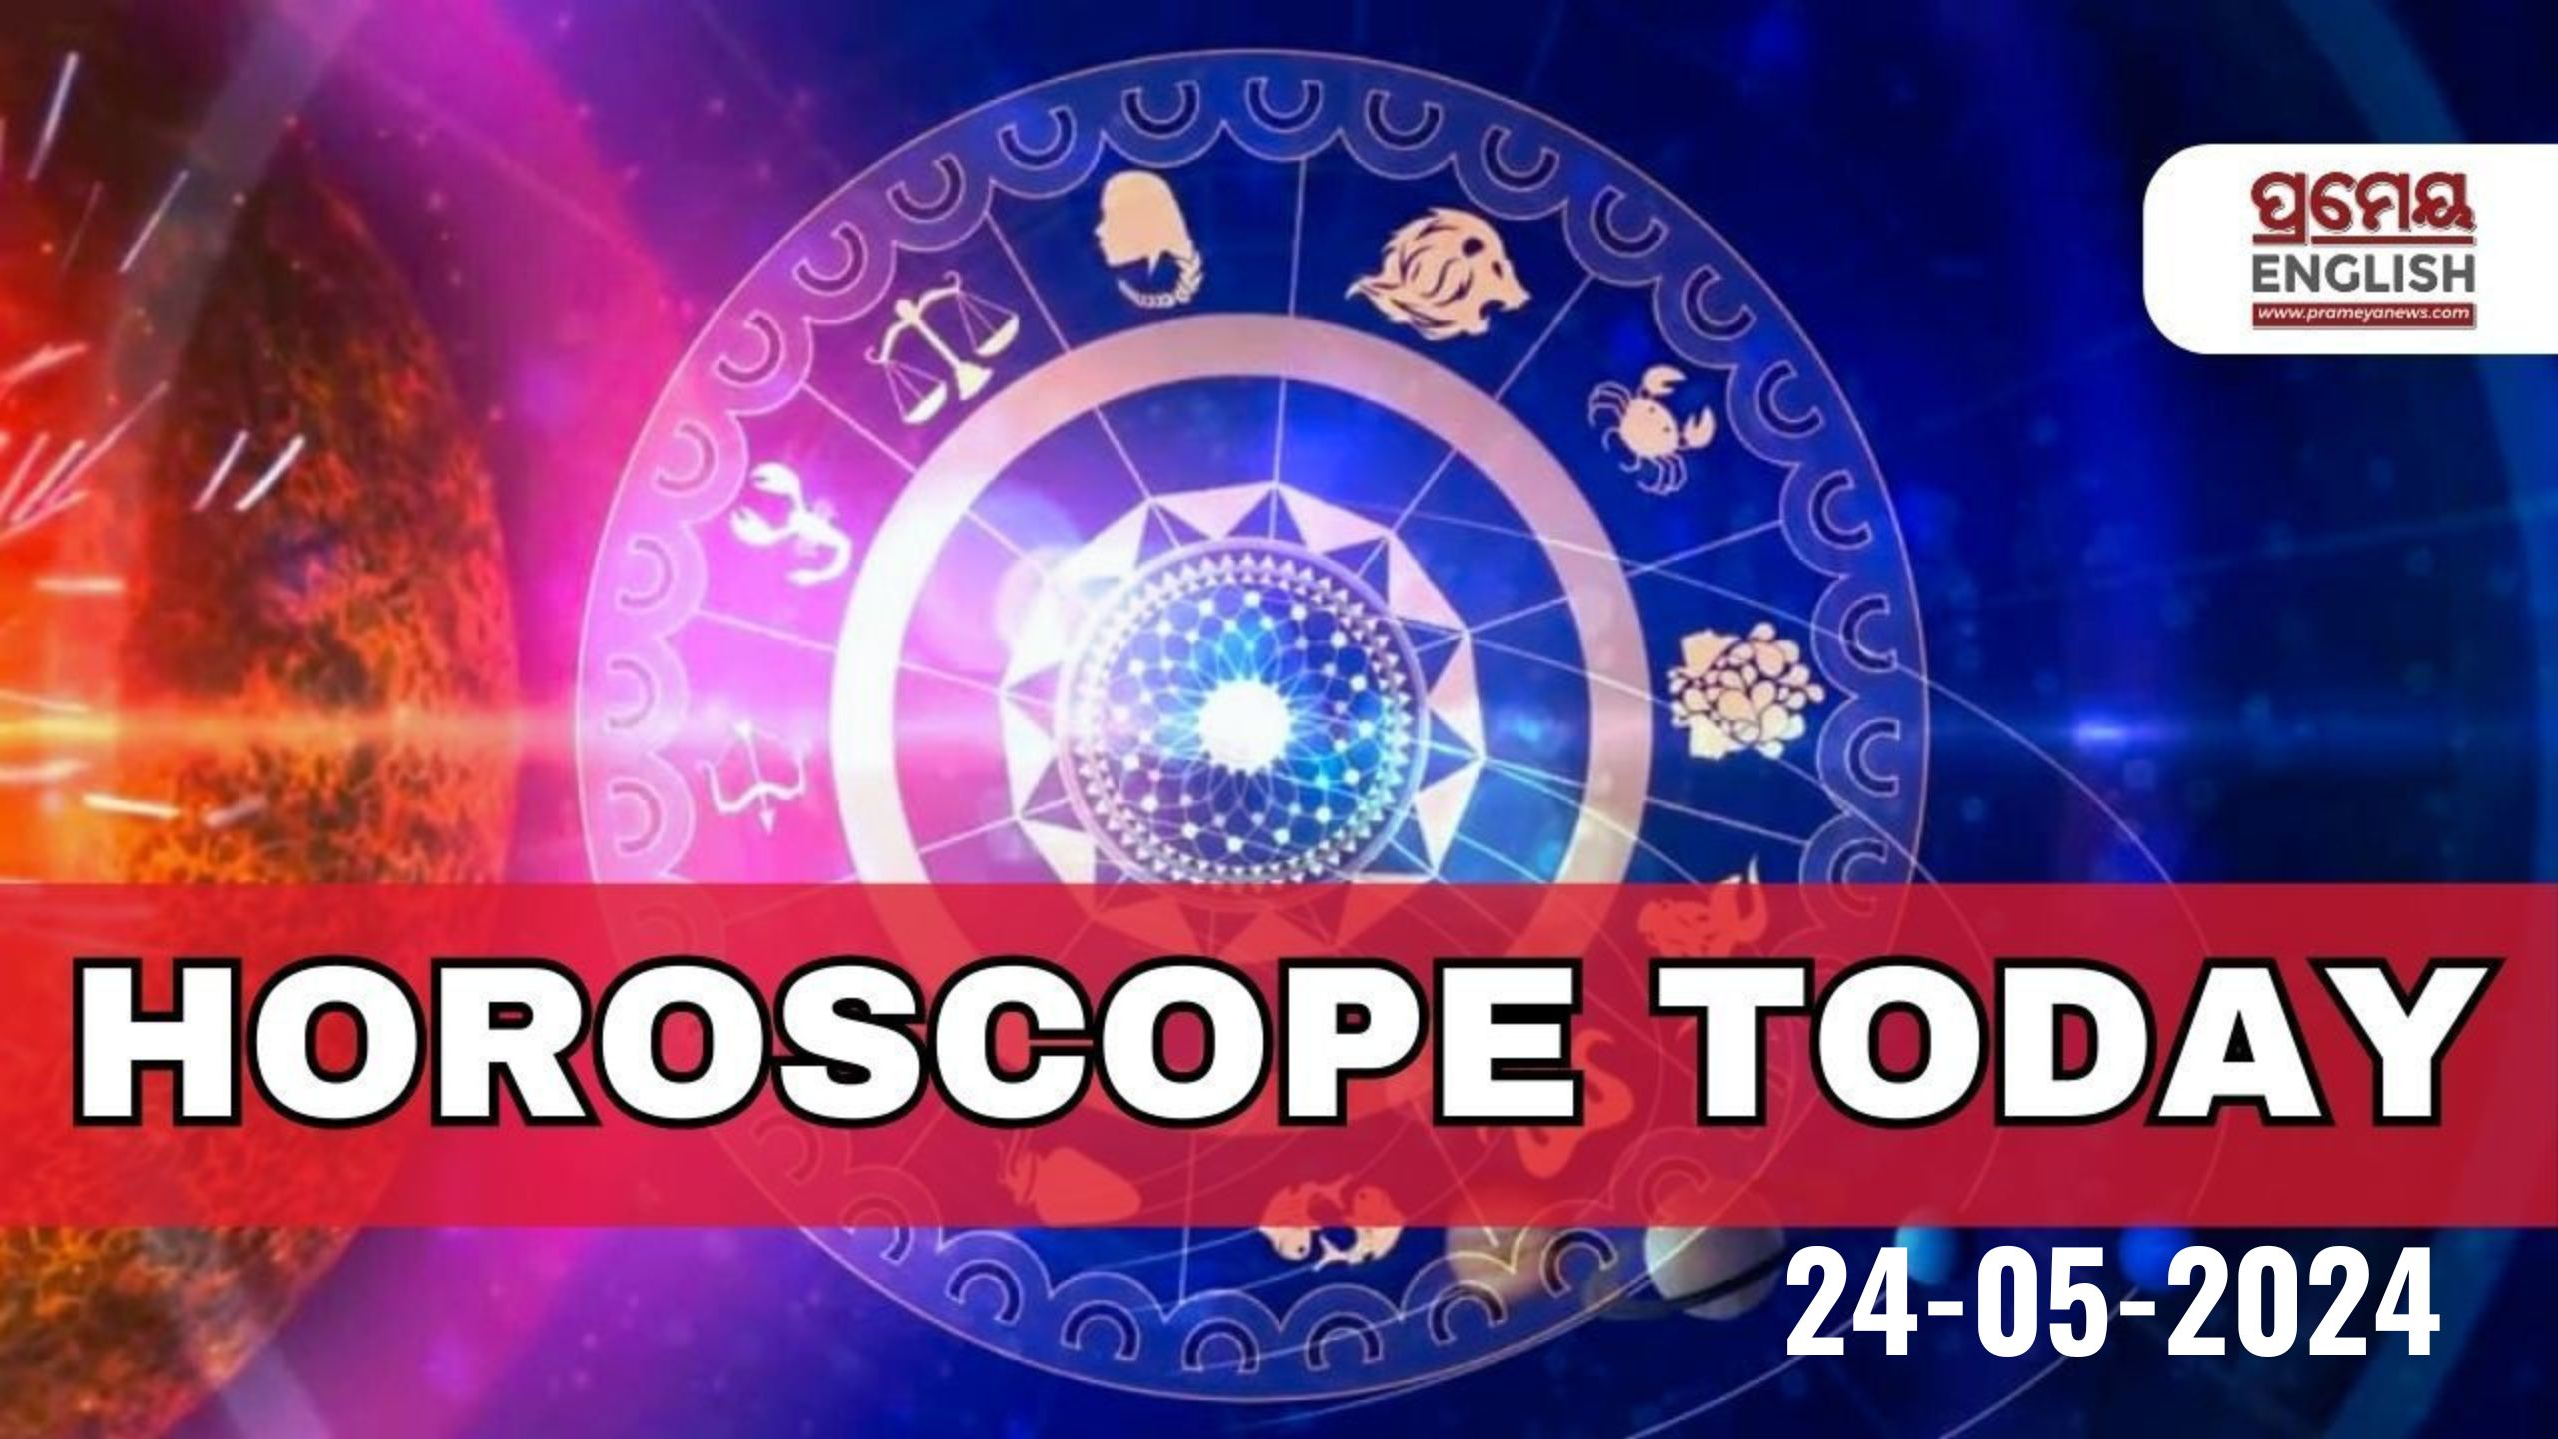 Horoscope Today: Astrological prediction for May 24, 2024